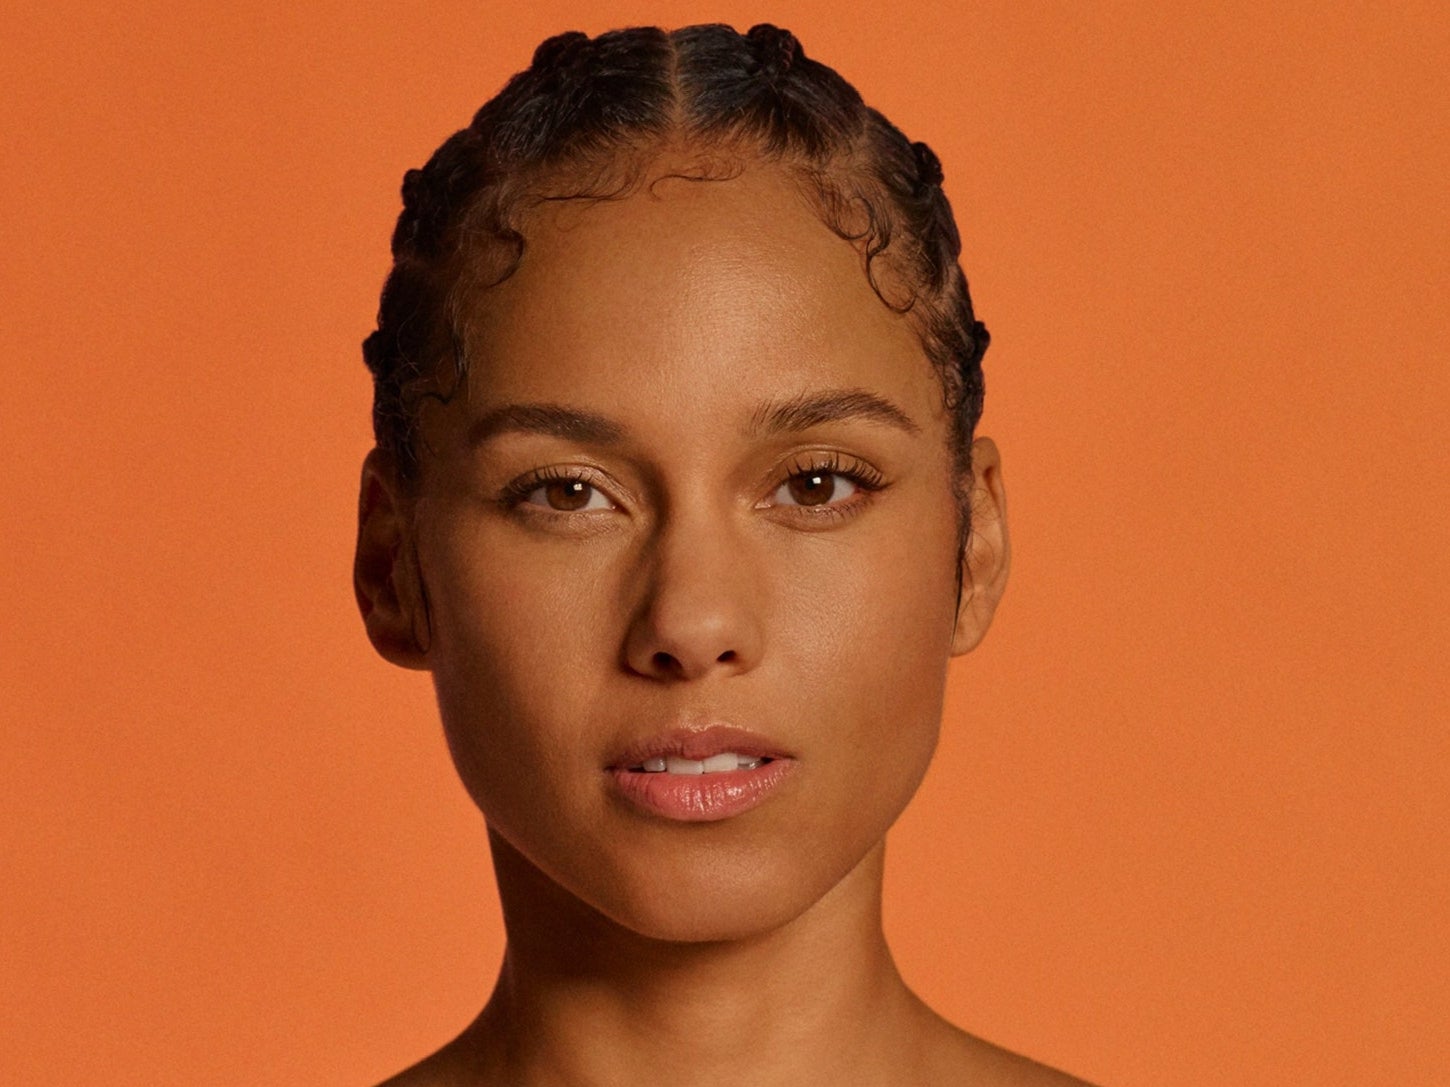 Alicia Keys Review Alicia Self Titled Album Shows Singer Rattling Between A Range Of Identities The Independent